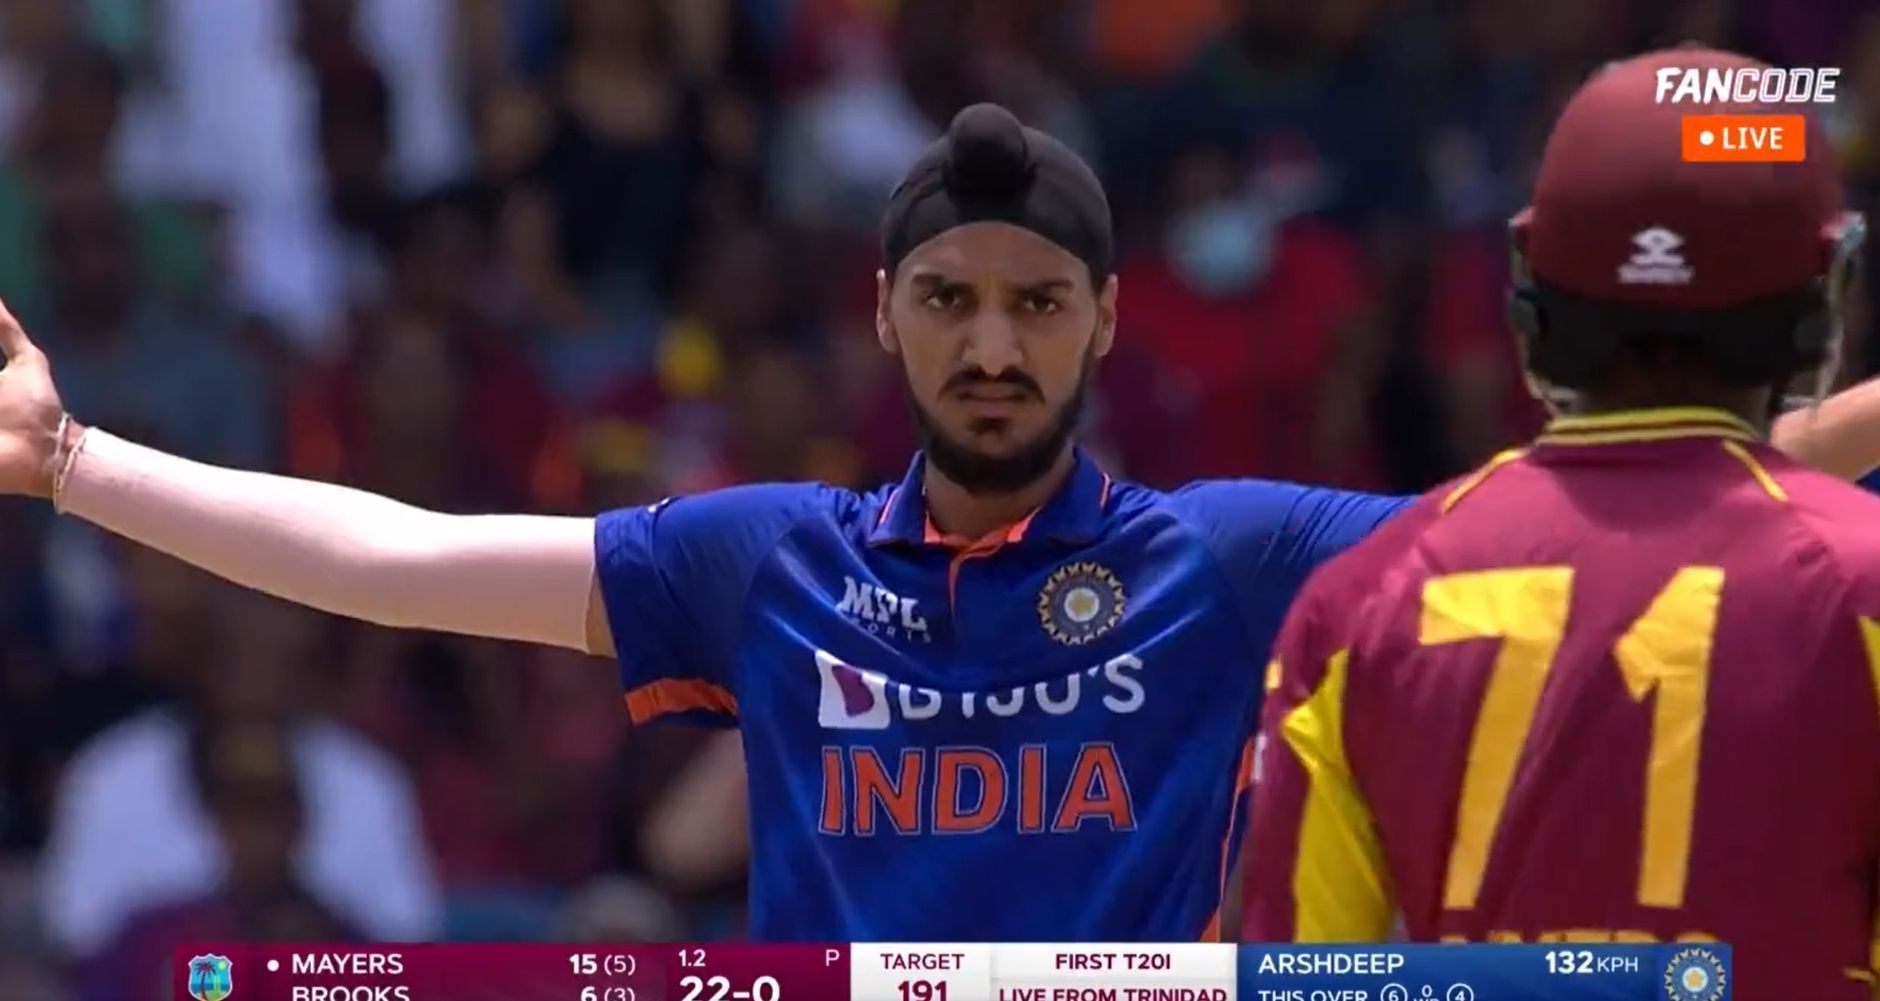 Arshdeep Singh staring at Kyle Mayers after his wicket. [Pic credits: FanCode]